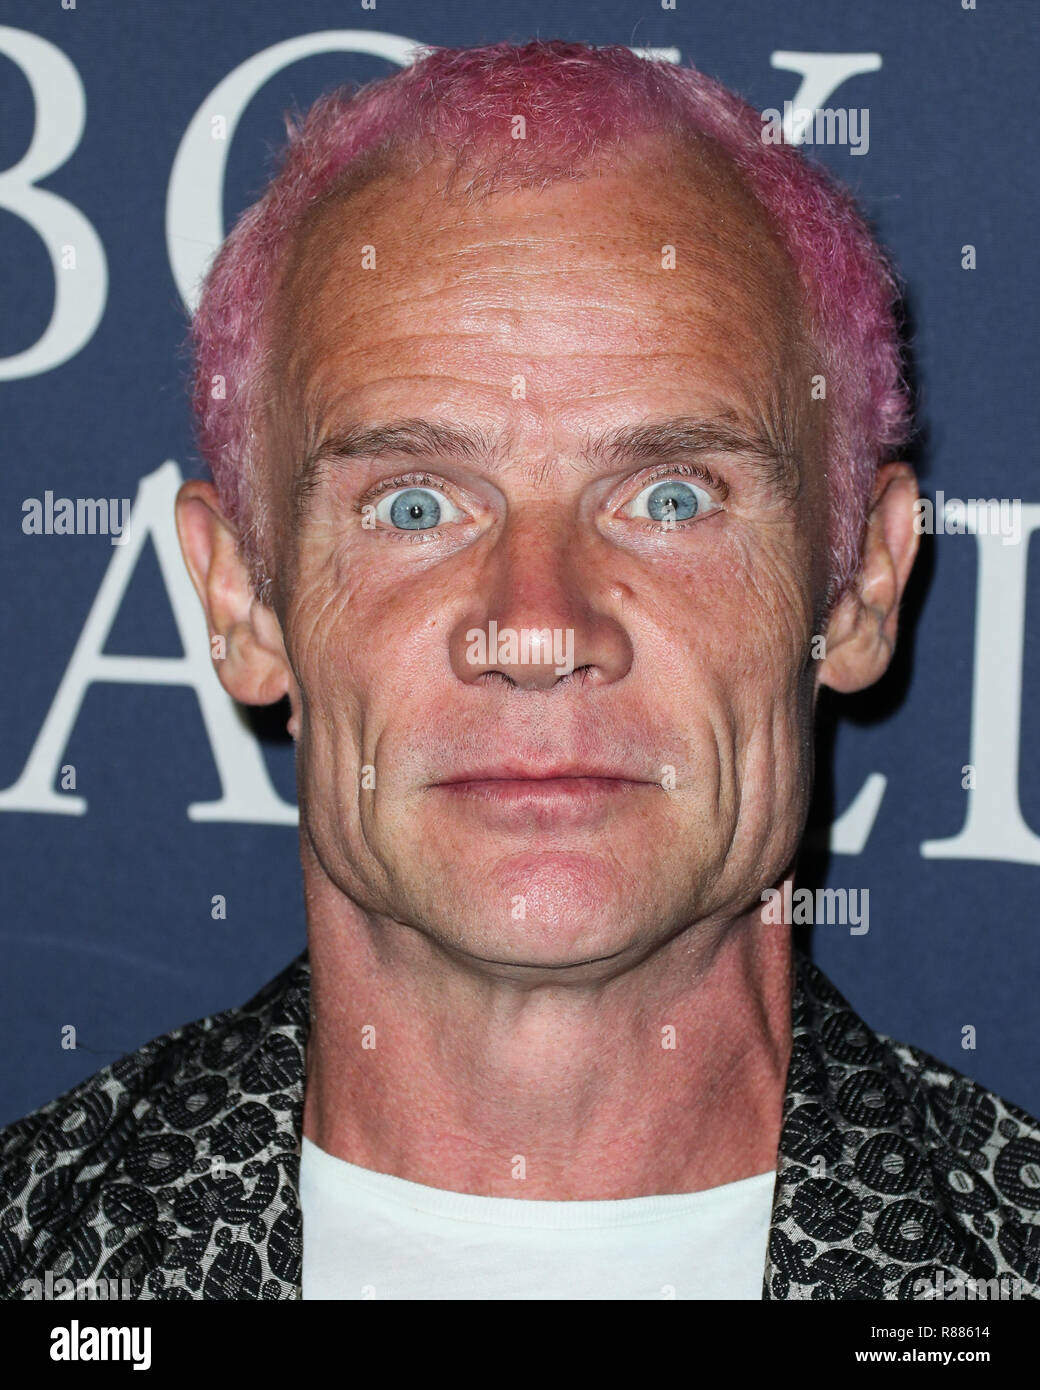 LOS ANGELES, CA, USA - OCTOBER 29: Flea, Michael Peter Balzary at the Los Angeles Premiere Of Focus Features' 'Boy Erased' held at the Directors Guild Of America Theater on October 29, 2018 in Los Angeles, California, United States. (Photo by Xavier Collin/Image Press Agency) Stock Photo